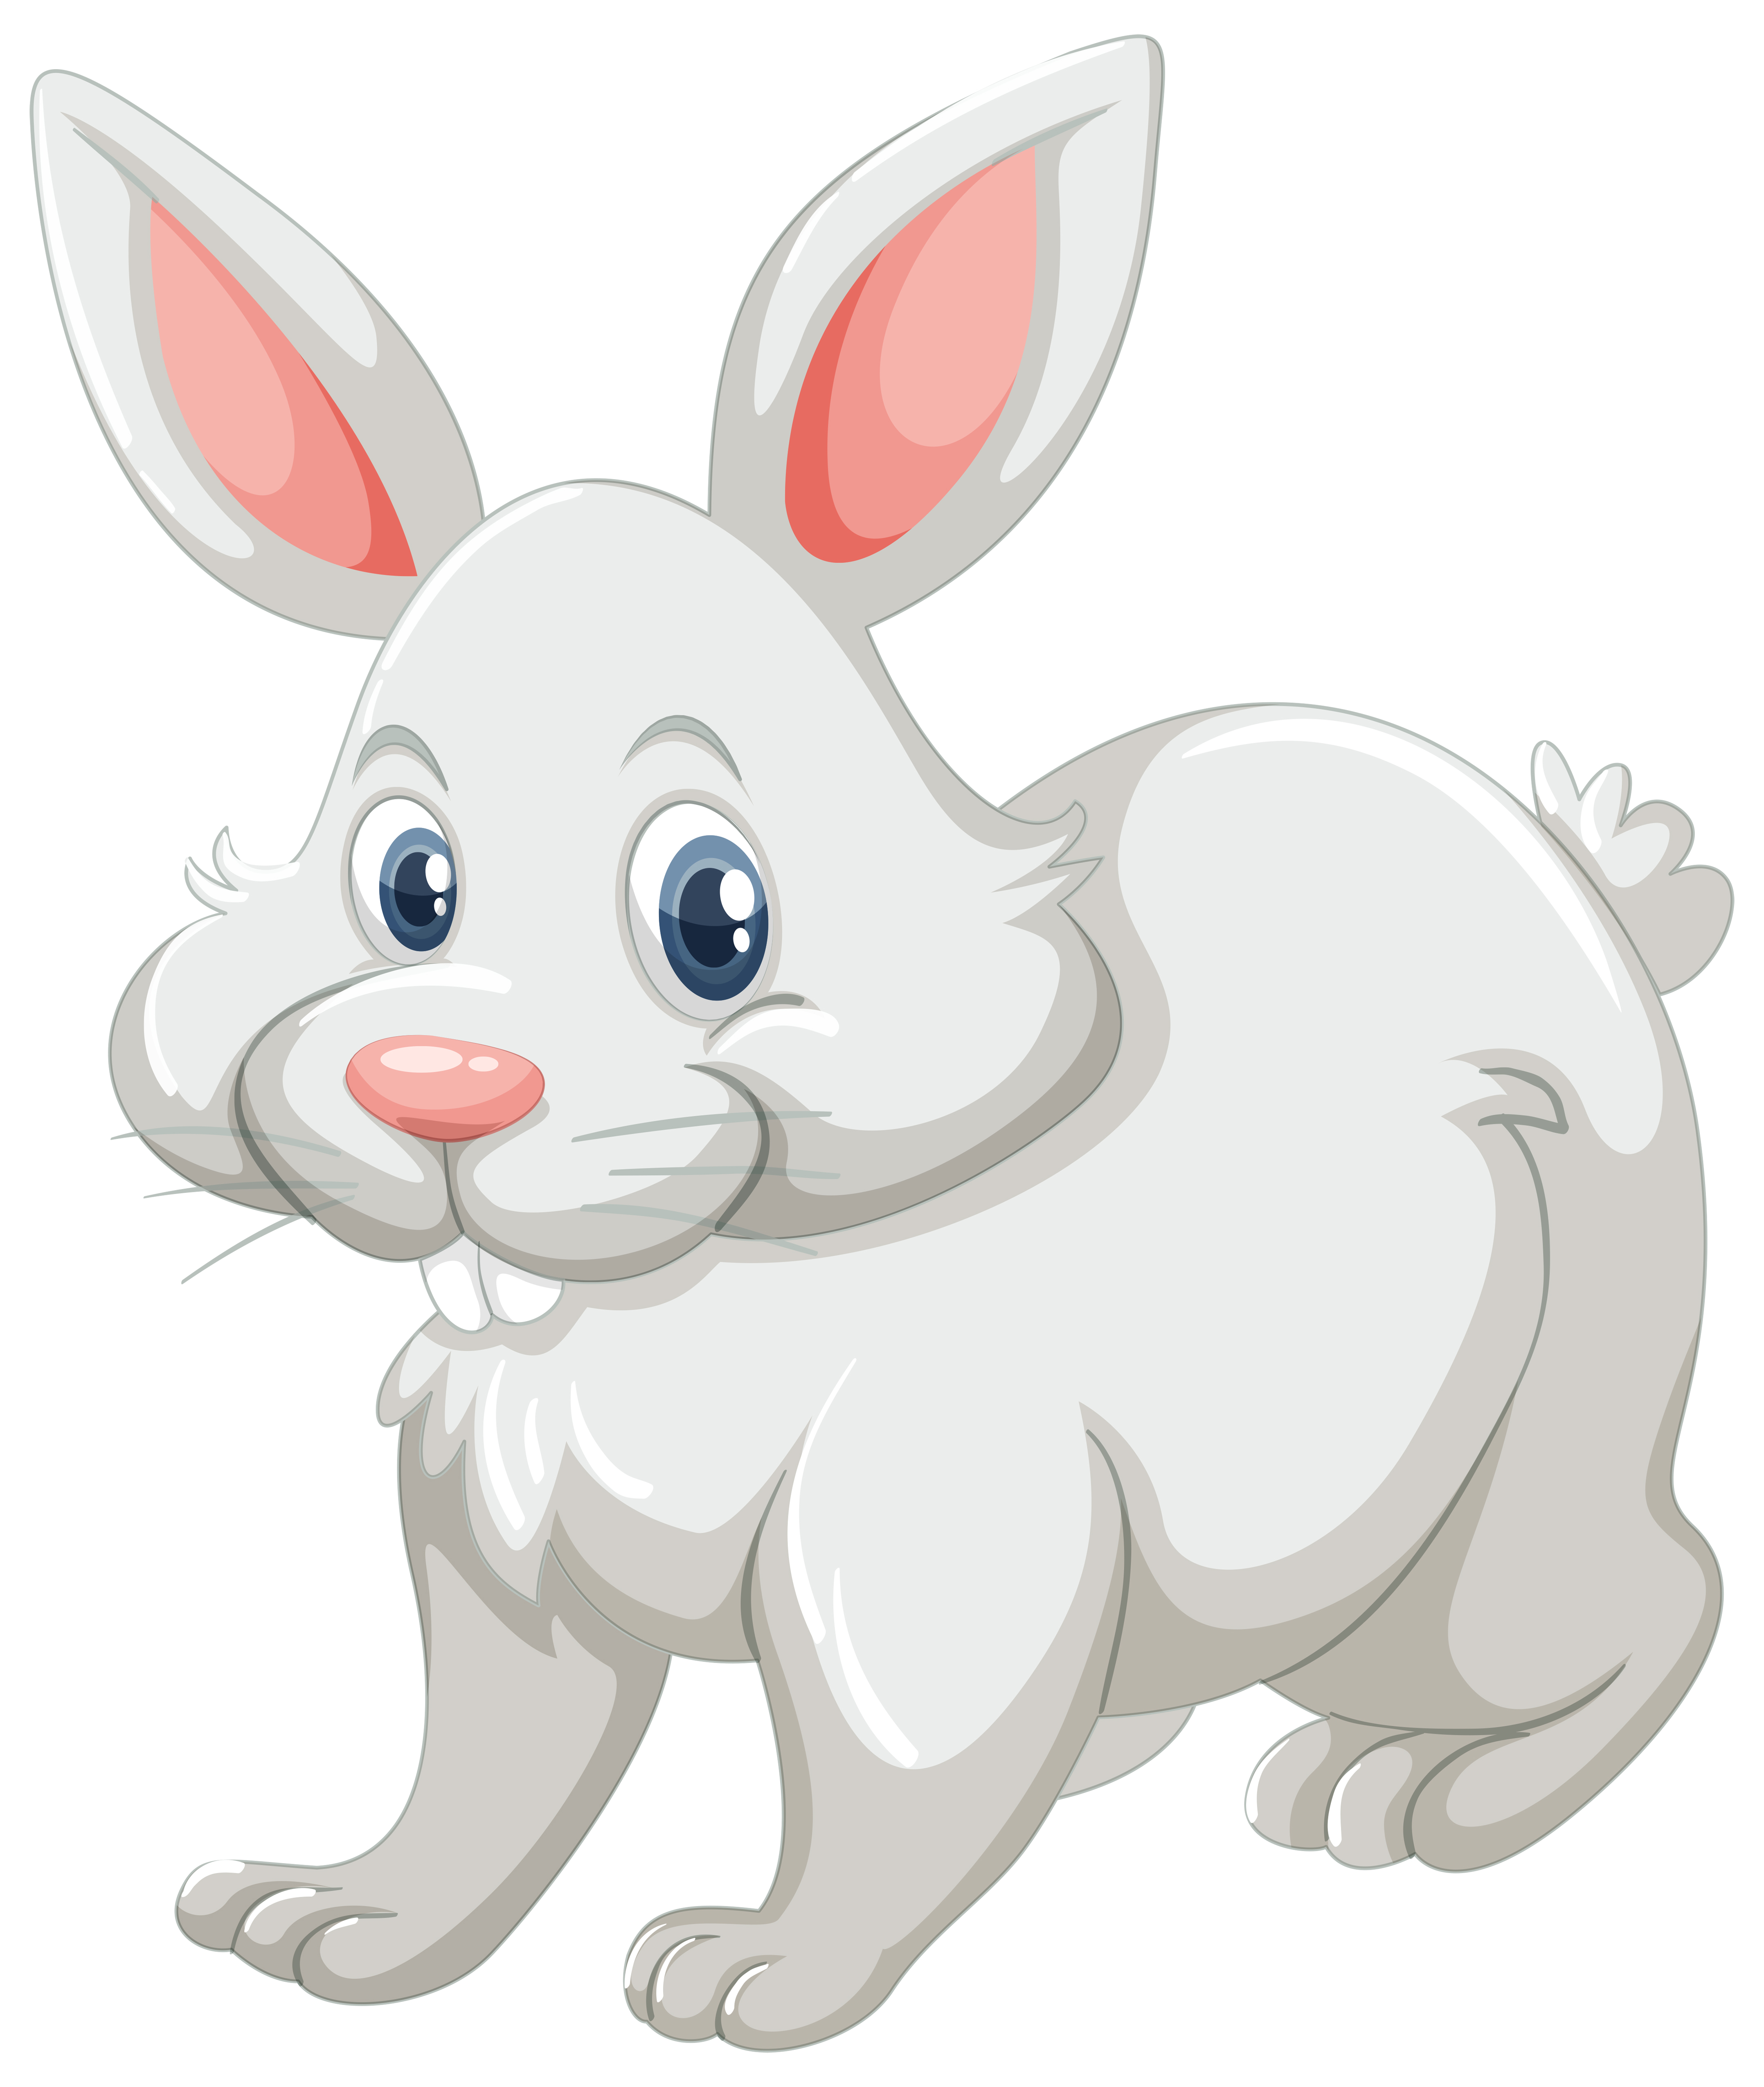 Download Cute rabbit with white fur - Download Free Vectors ...